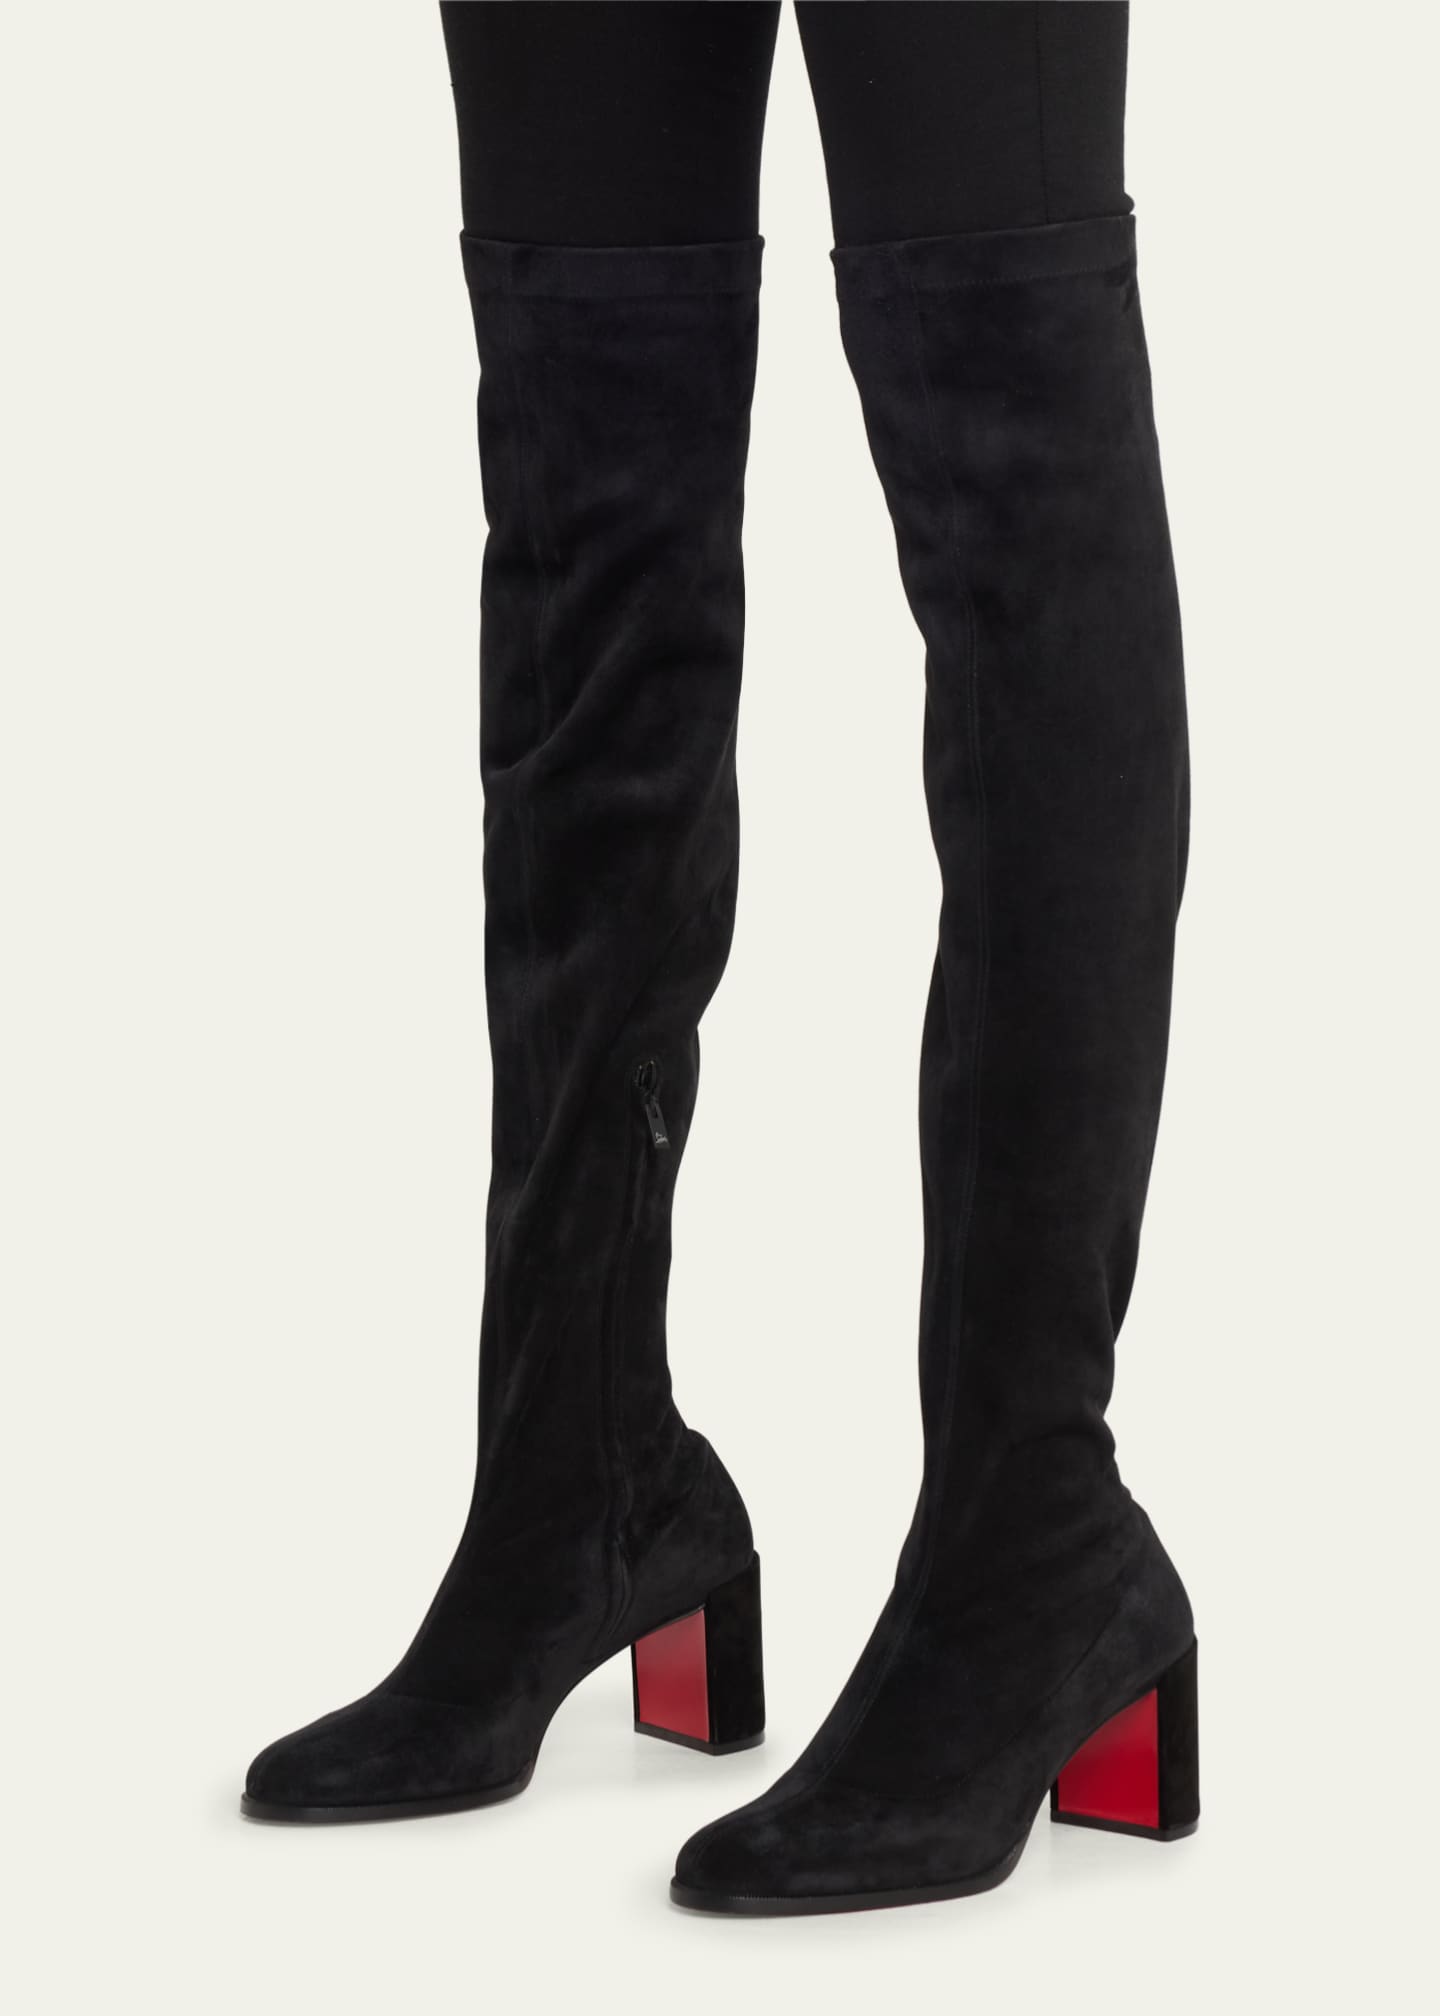 Christian Louboutin Adoxa Stretch Suede Red-Sole Over-The-Knee Boots ...